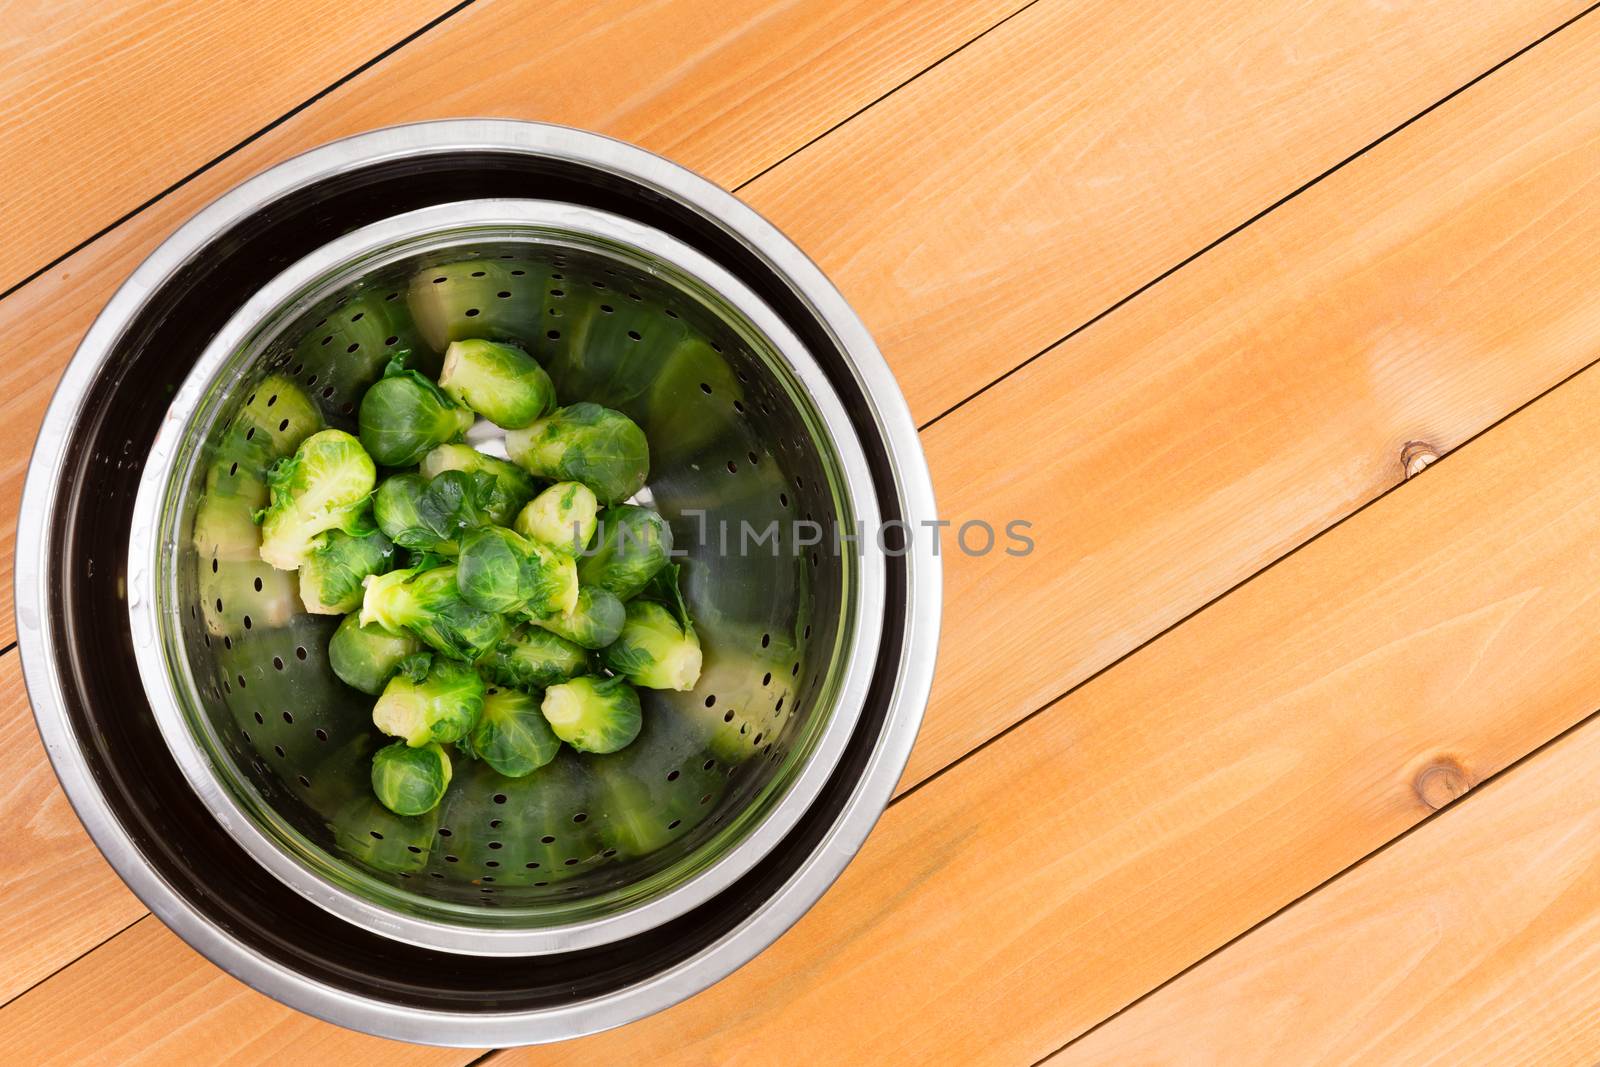 Freshly boiled leafy green brussels sprouts by coskun